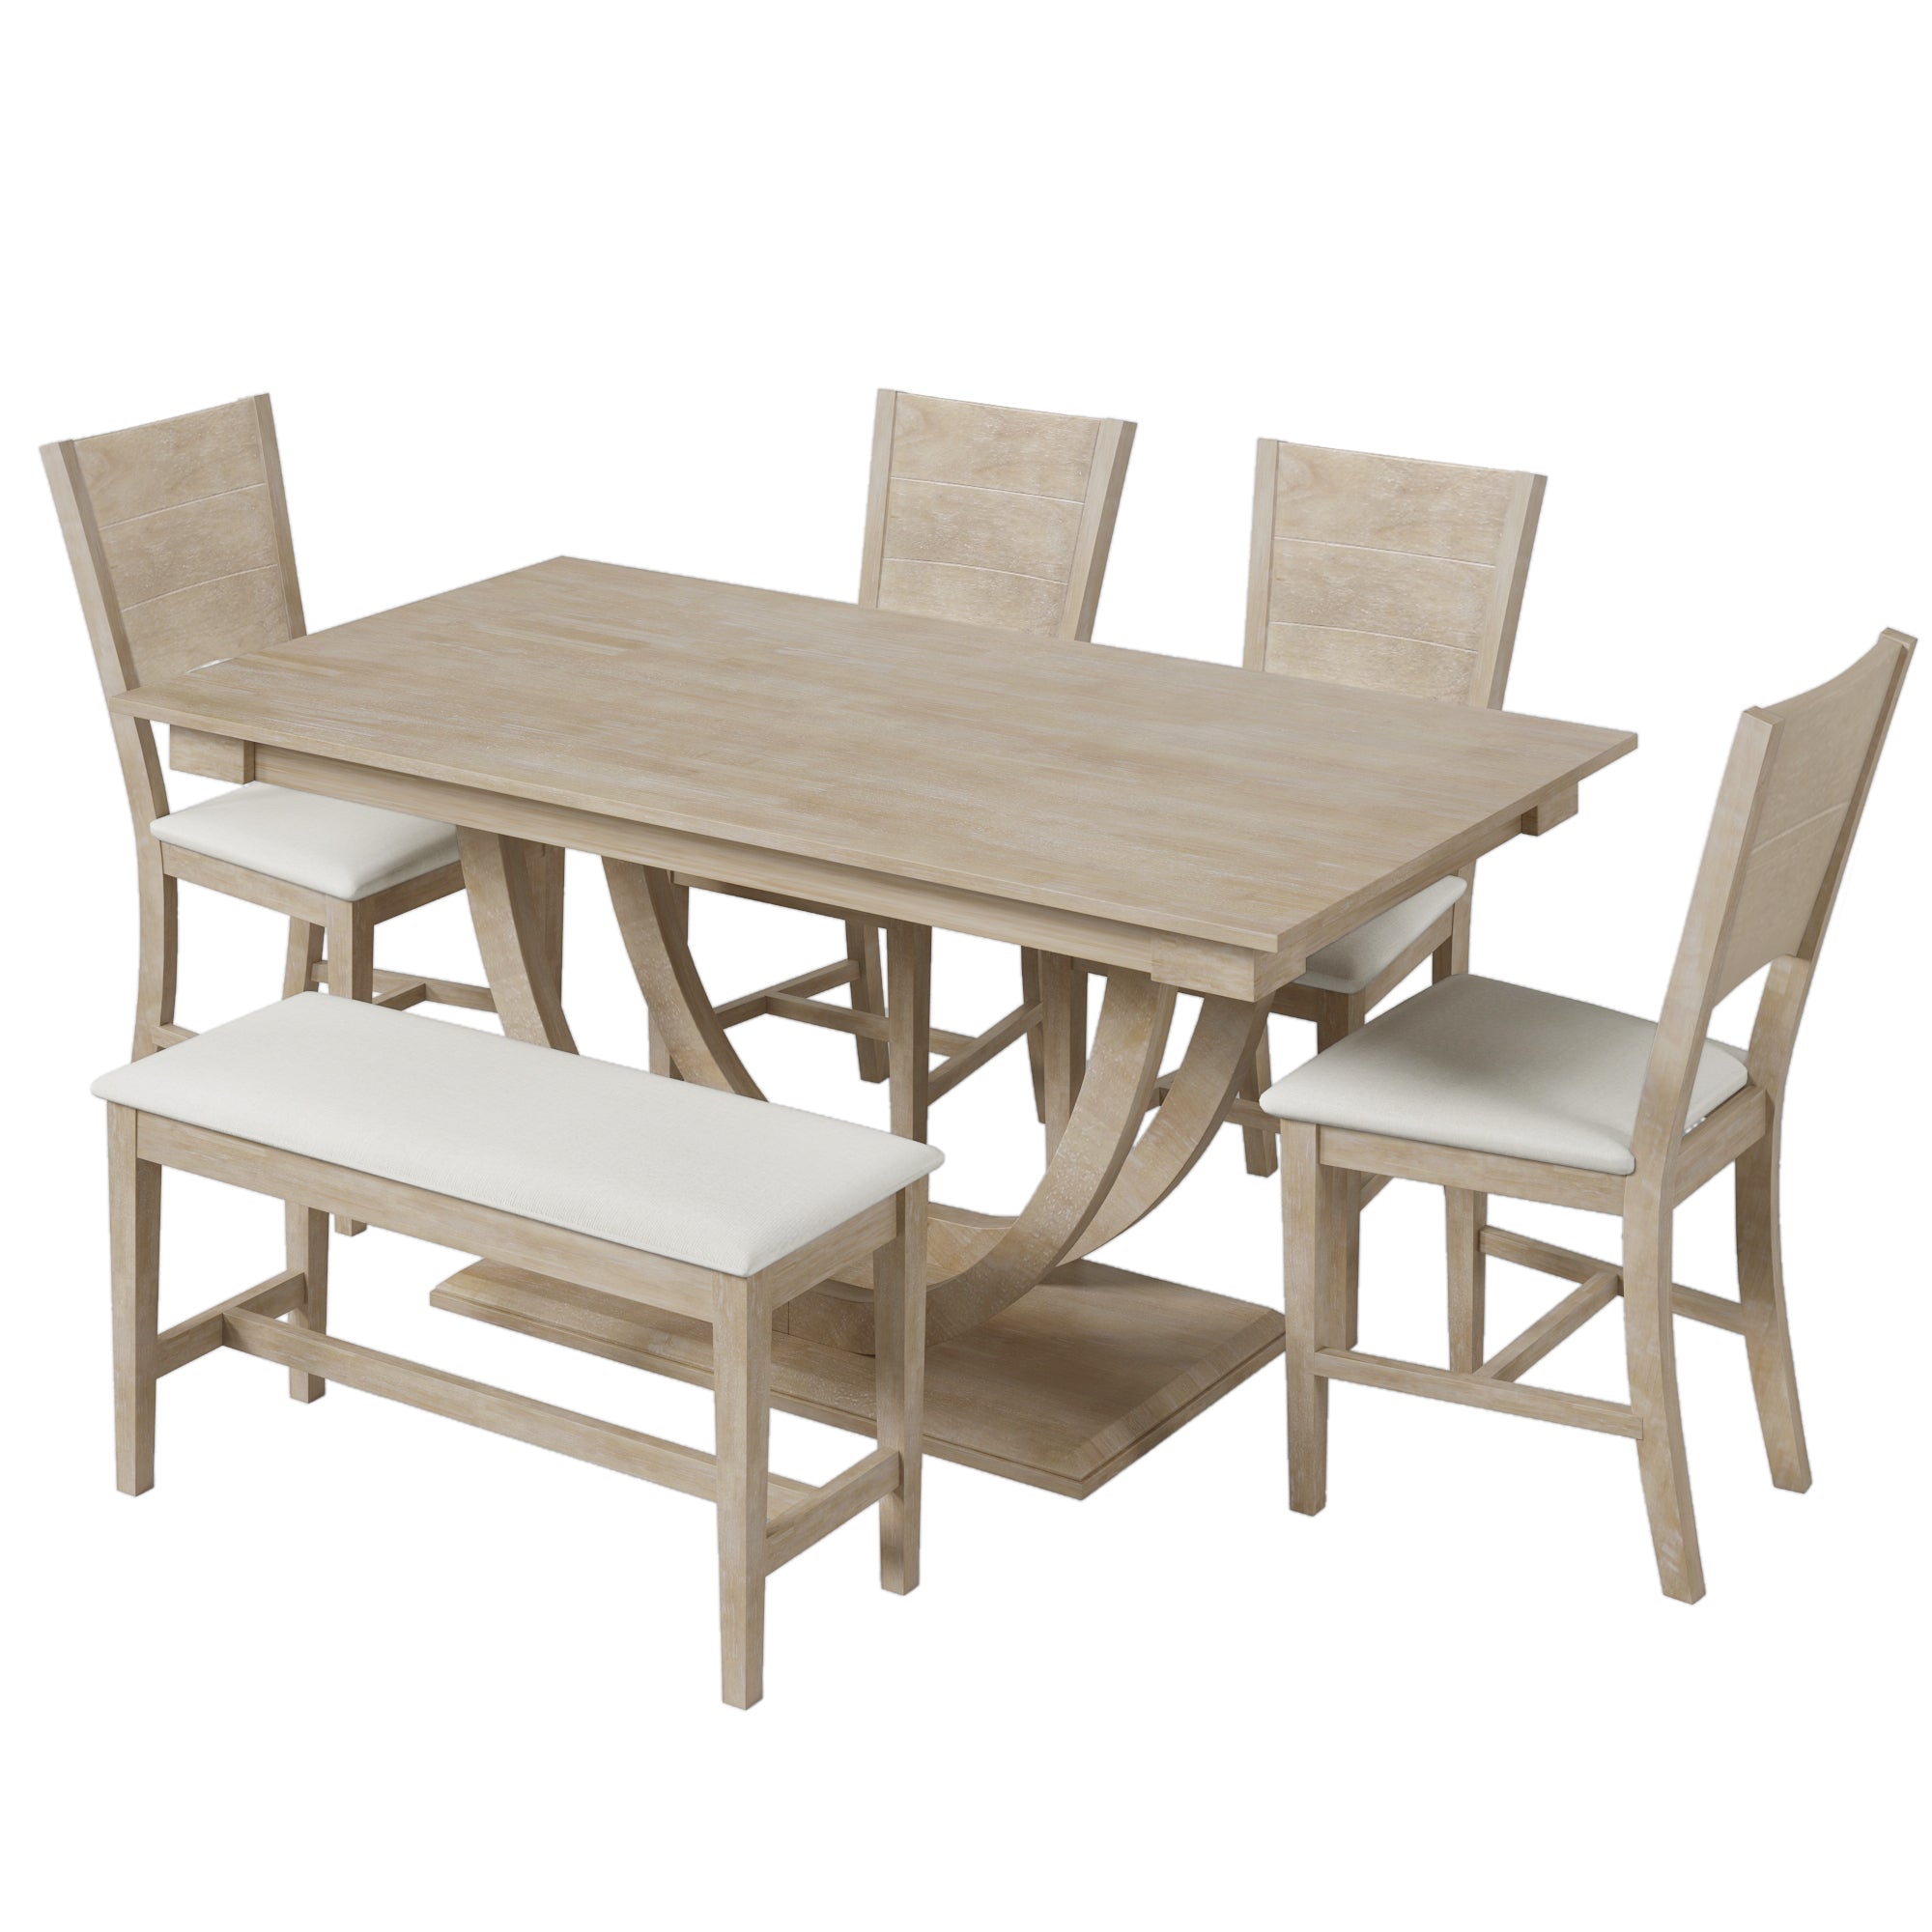 Modern Style 6-Piece Wood Half Round Dining Table Set with Long Bench and 4 Dining Chairs - Natural